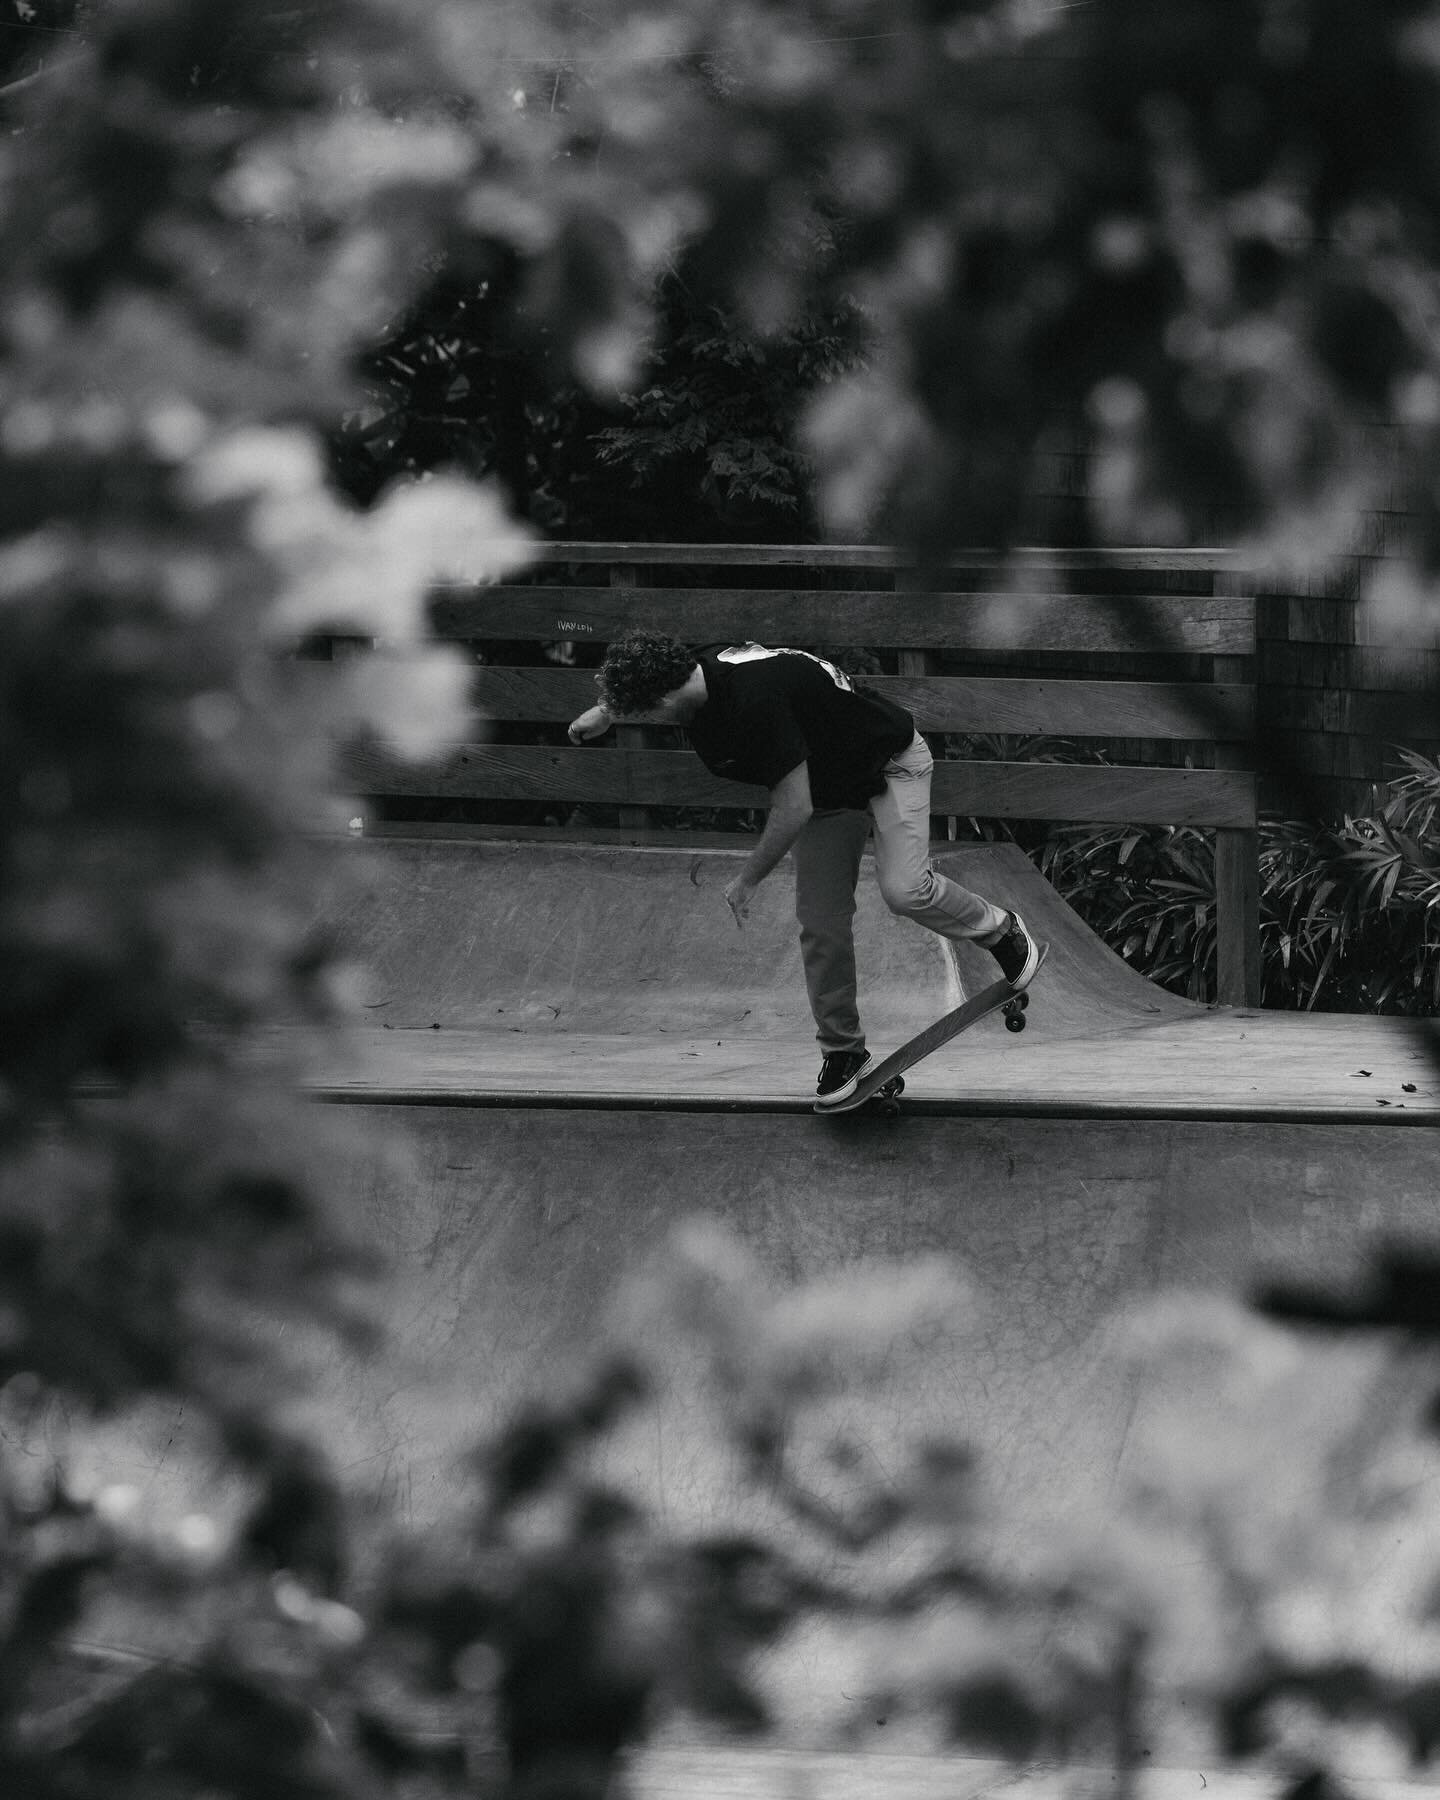 An evening at the bowl with Max
shot on digital and #400tmax
@uluwatusurfvillas